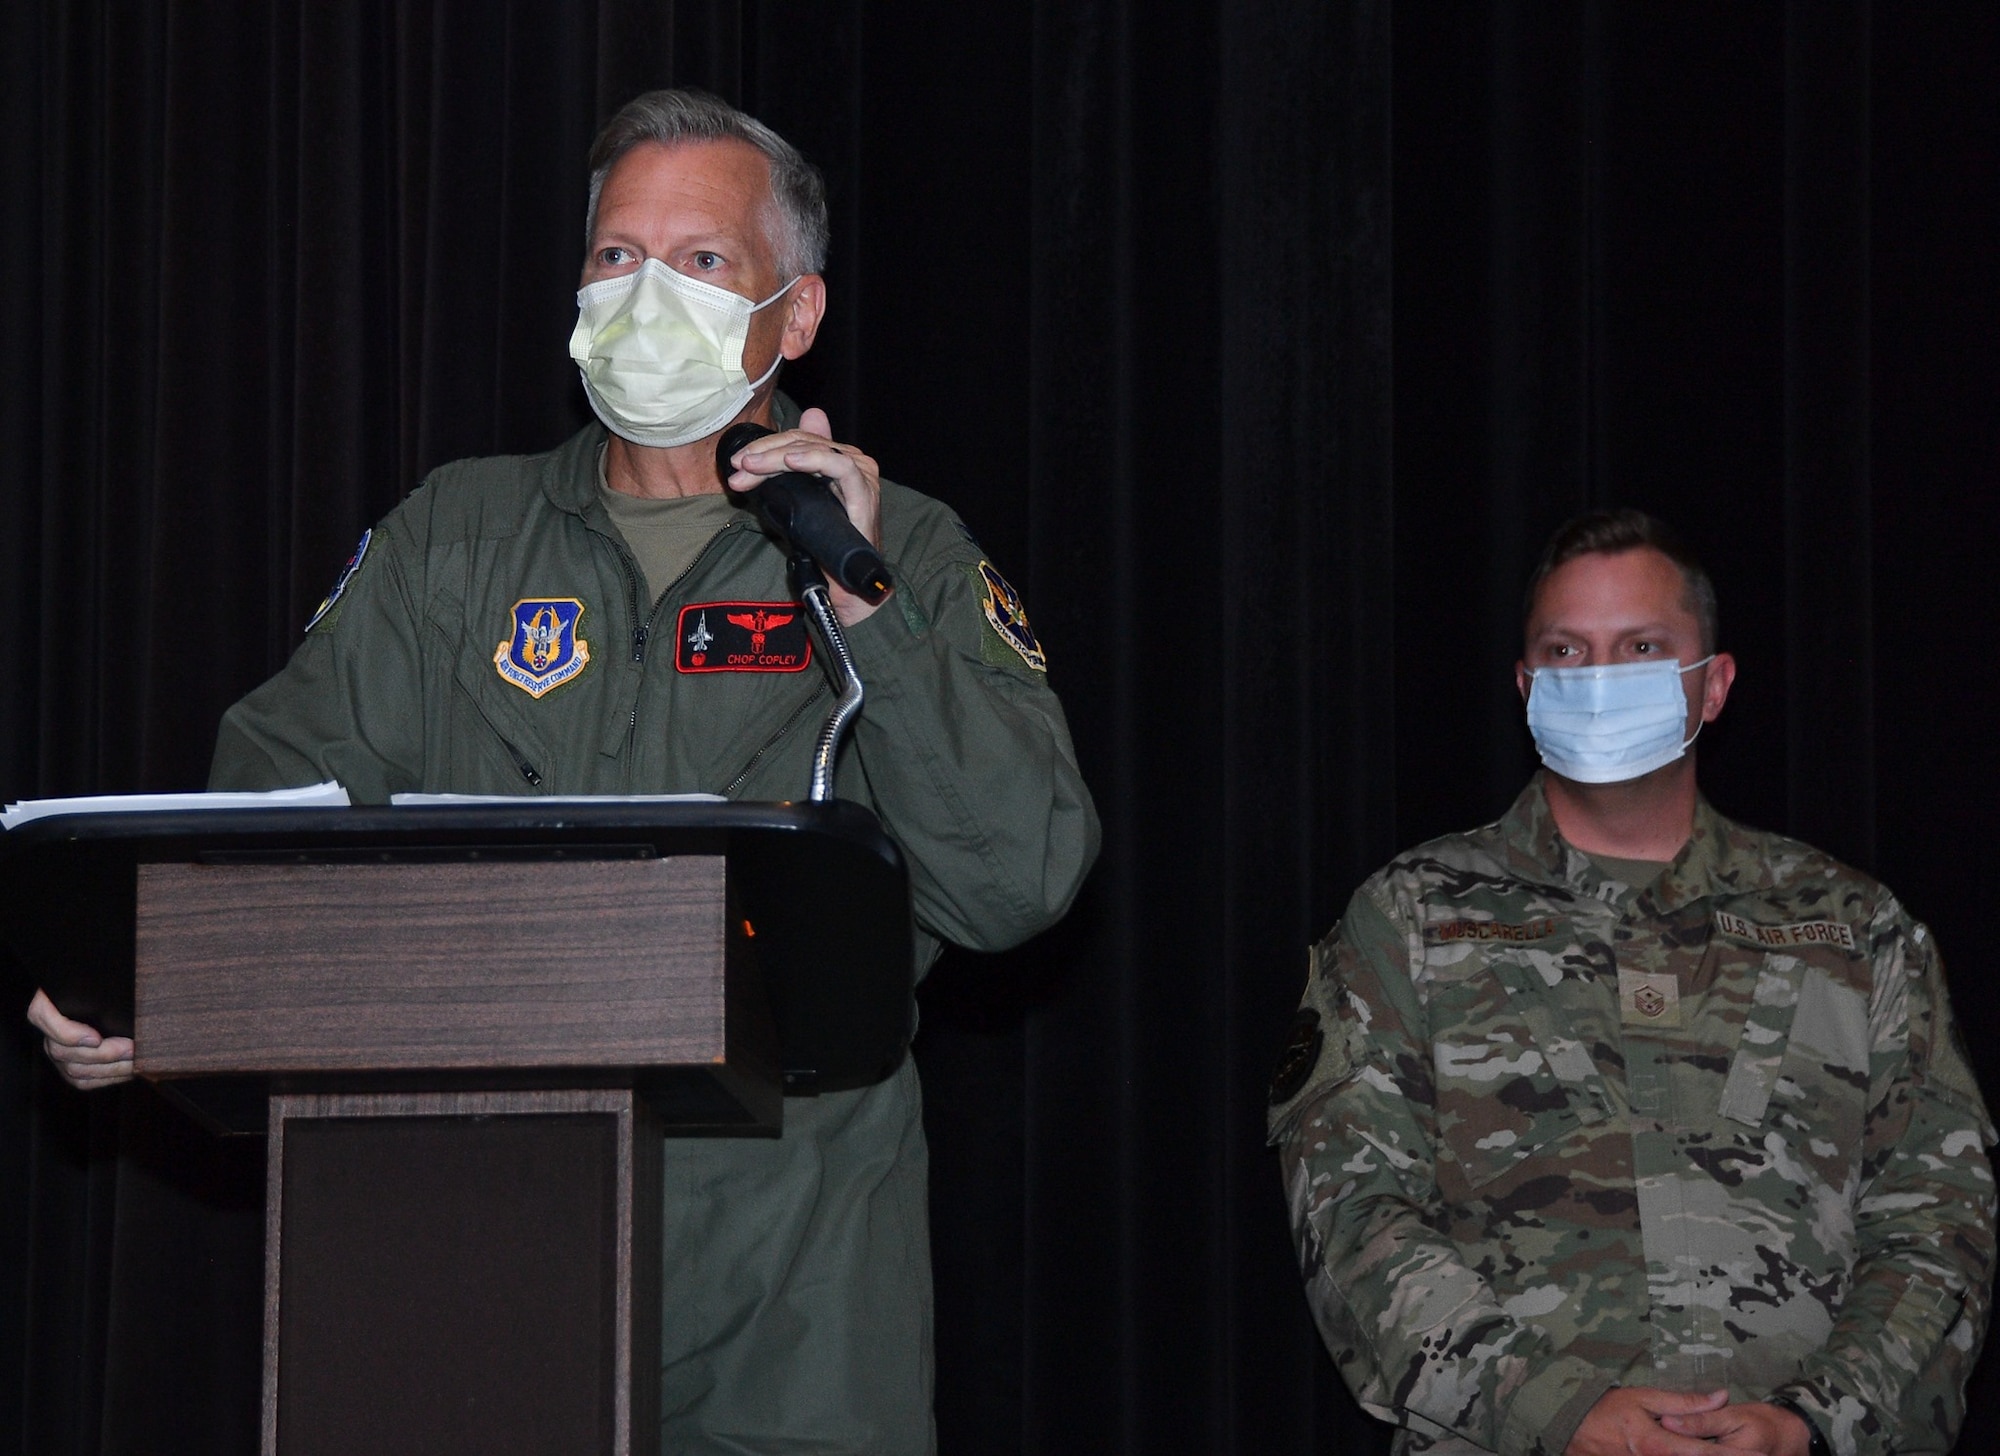 (left) 301st Fighter Wing Medical Squadron Commander Col. Lawson Copley addresses his Airmen during an MDS enlisted promotion ceremony at NAS JRB Fort Worth on August 8, 2021. (left) 301st Fighter Wing Medical Squadron Commander Col. Lawson Copley addresses his Airmen as MDS First Sgt. Julian Muscarella, the ceremony's narrator, looks on during an MDS enlisted promotion ceremony at NAS JRB Fort Worth on August 8, 2021. More than 30 Airmen in attendance were recognized as they promoted up to their next military rank. (U.S. Air Force photo by Master Sgt. Jeremy Roman)